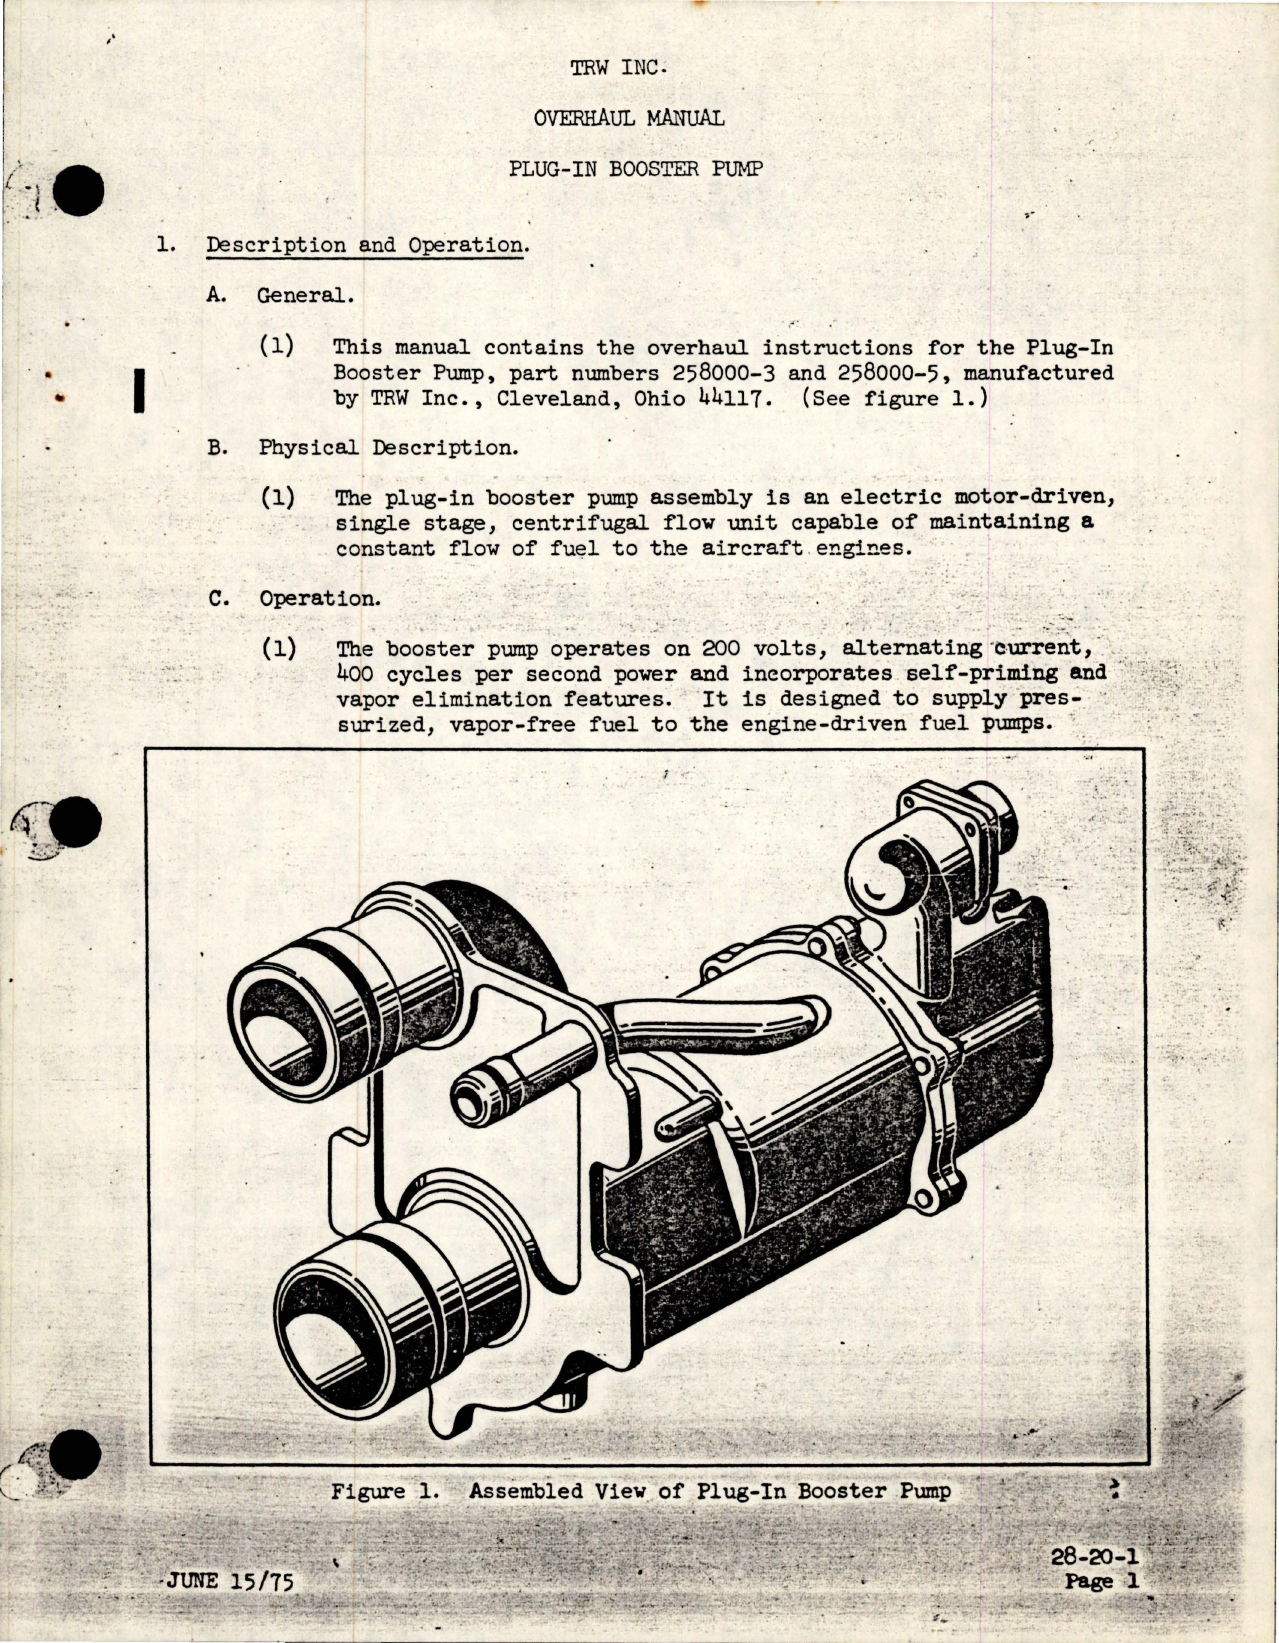 Sample page 9 from AirCorps Library document: Overhaul Instructions with Illustrated Parts Catalog for Plug In Booster Pump - 258000-3 and 258000-5